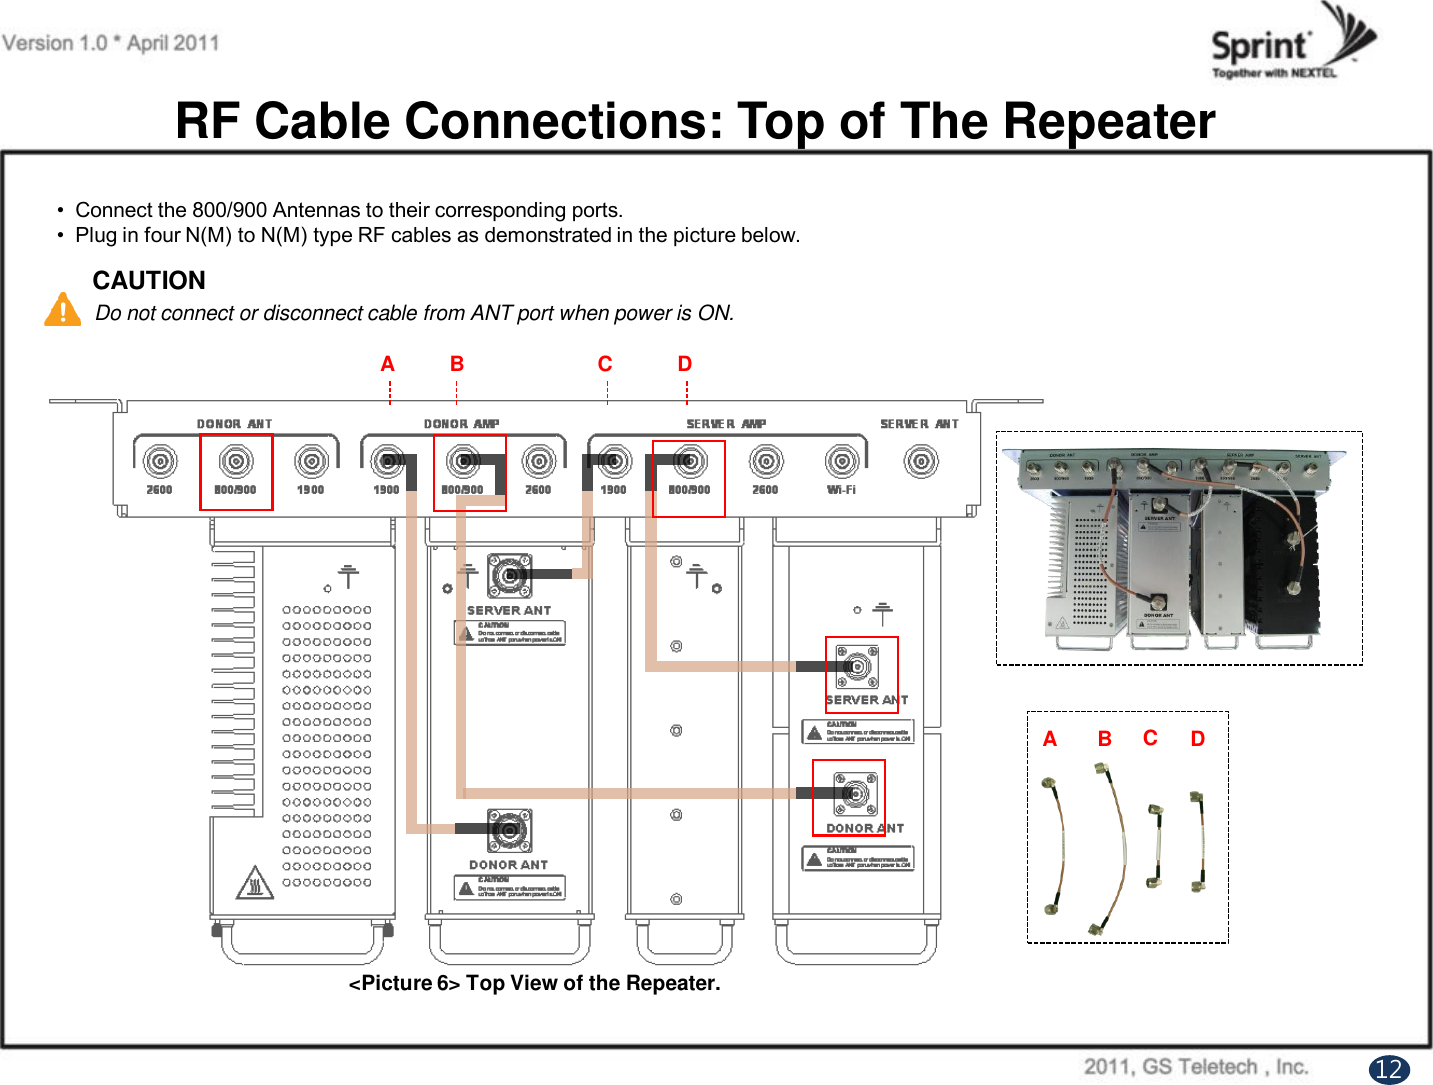 RF Cable Connections: Top of The RepeaterCAUTIONDo not connect or disconnect cable from ANT port when power is ON.•  Connect the 800/900 Antennas to their corresponding ports.•  Plug in four N(M) to N(M) type RF cables as demonstrated in the picture below.A B C DA B CD&lt;Picture 6&gt; Top View of the Repeater.12